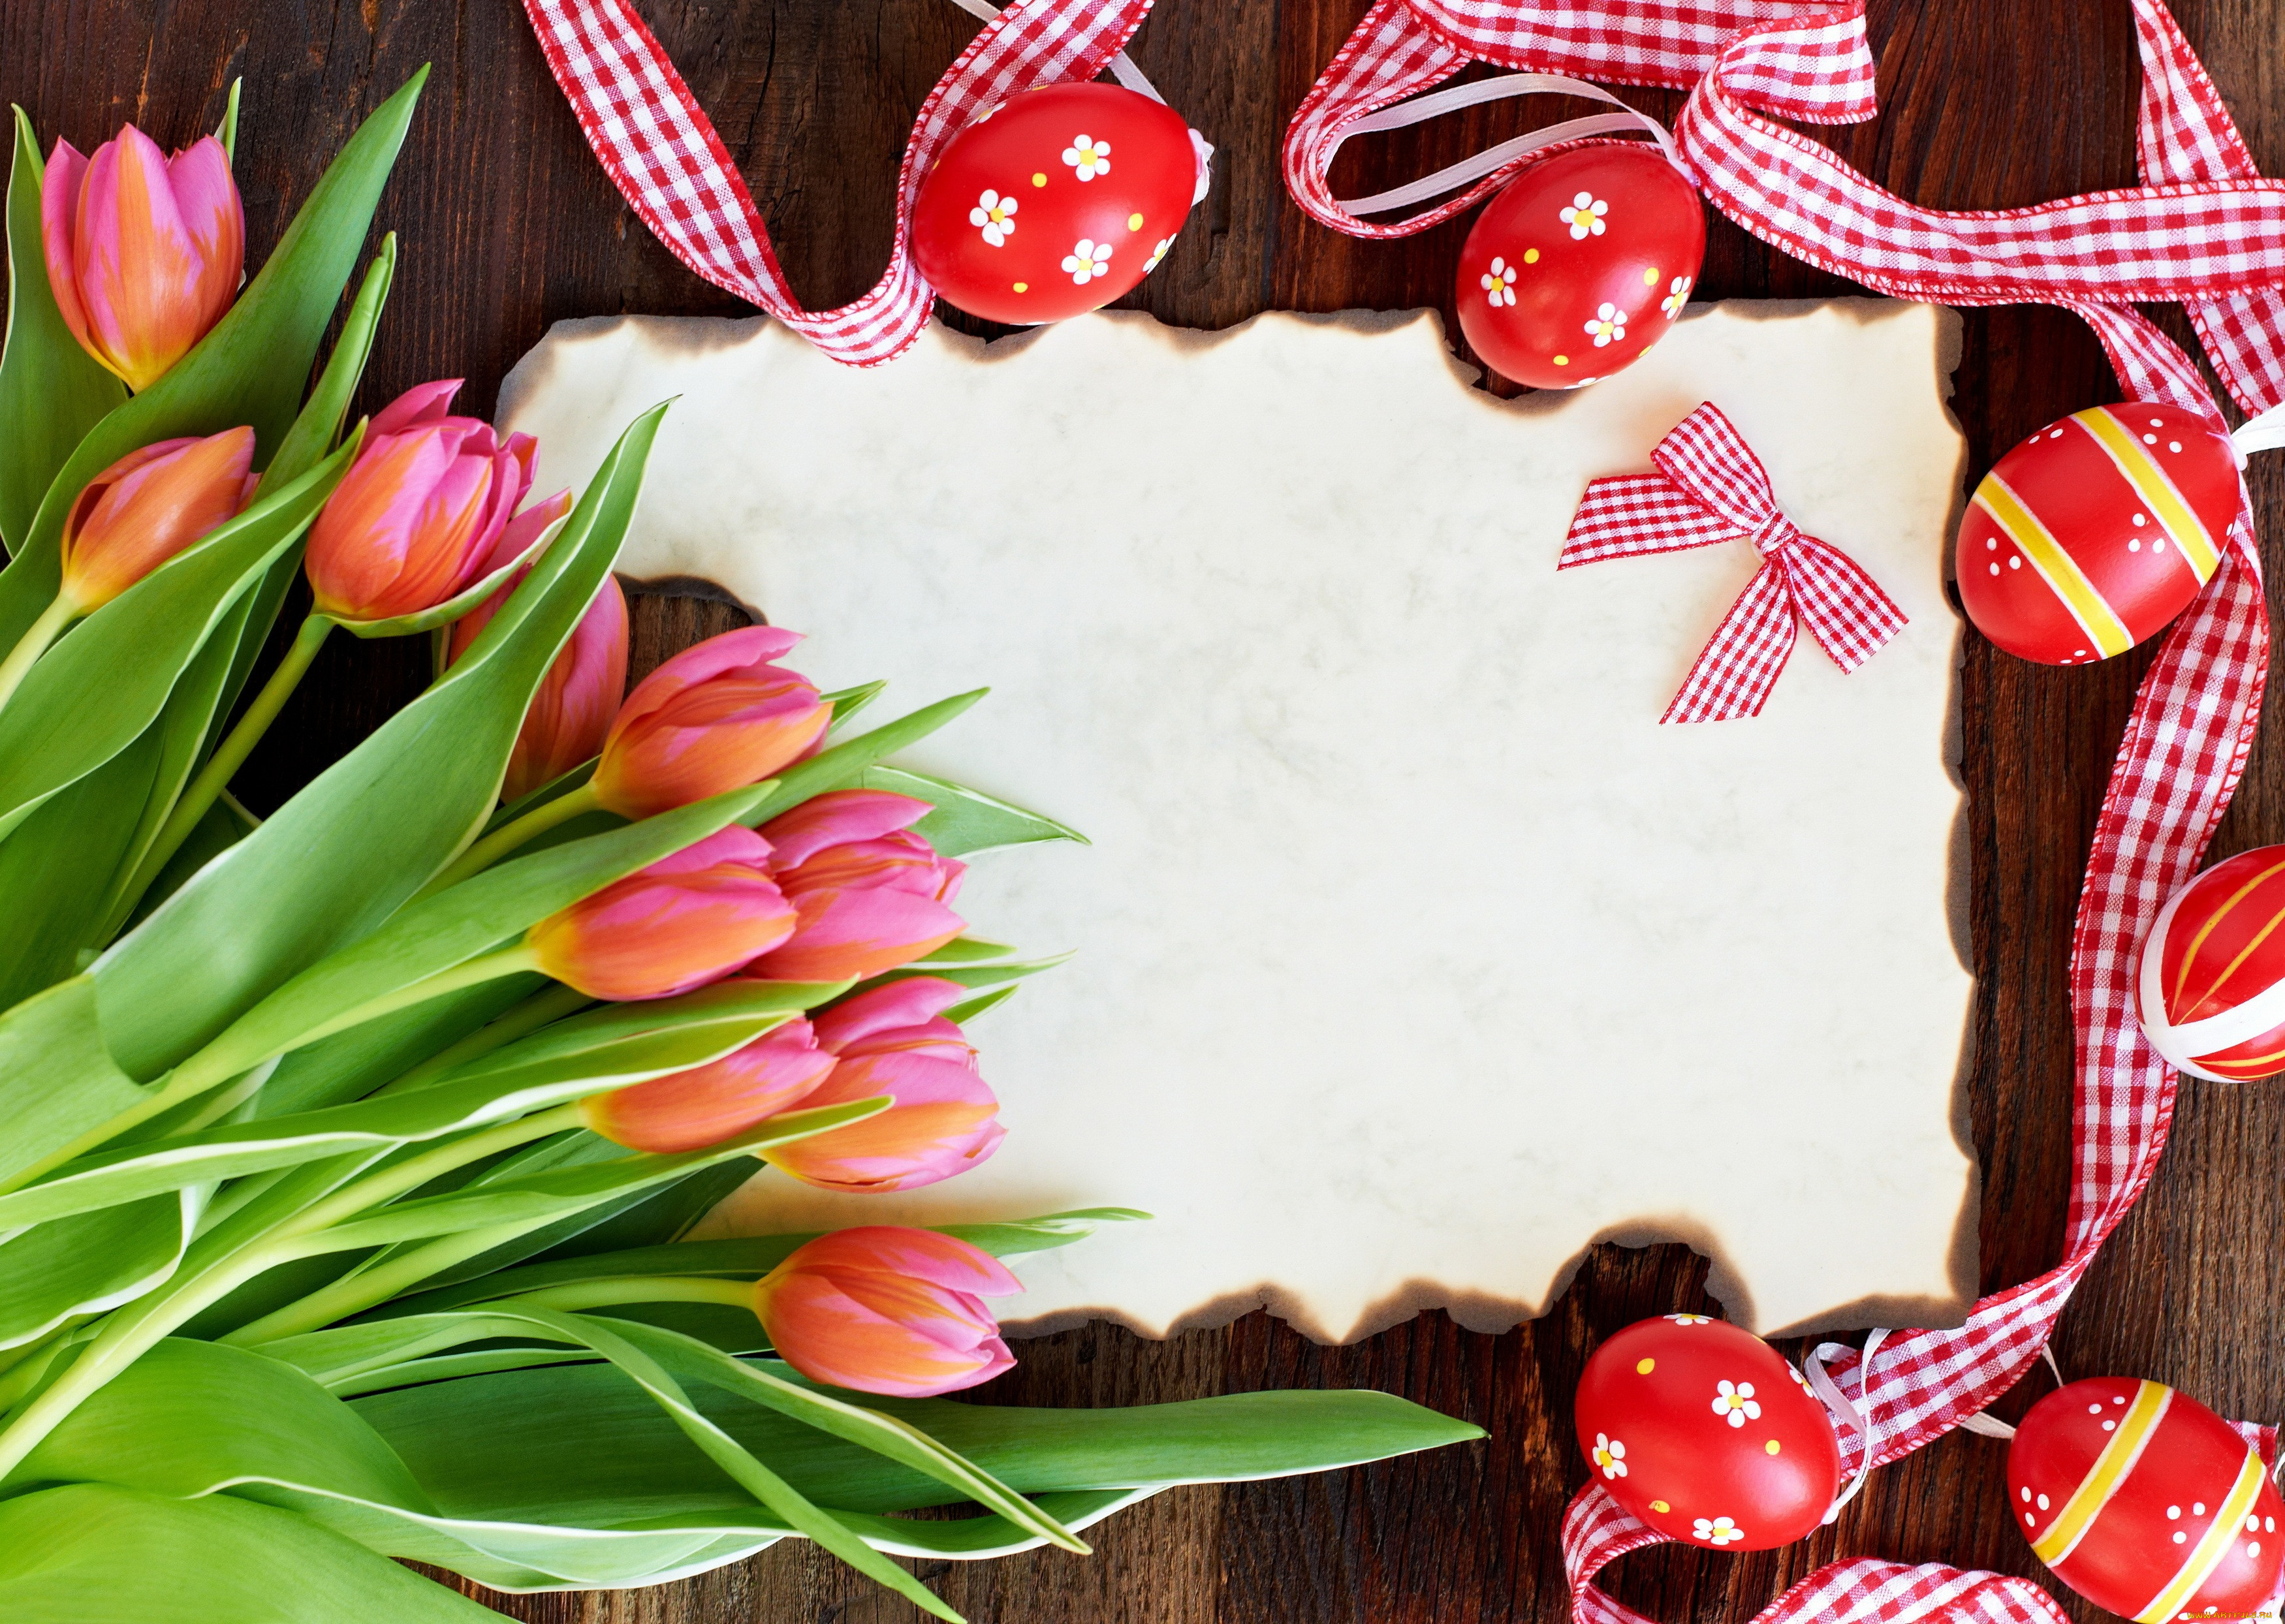 , , , card, tulips, red, flowers, eggs, easter